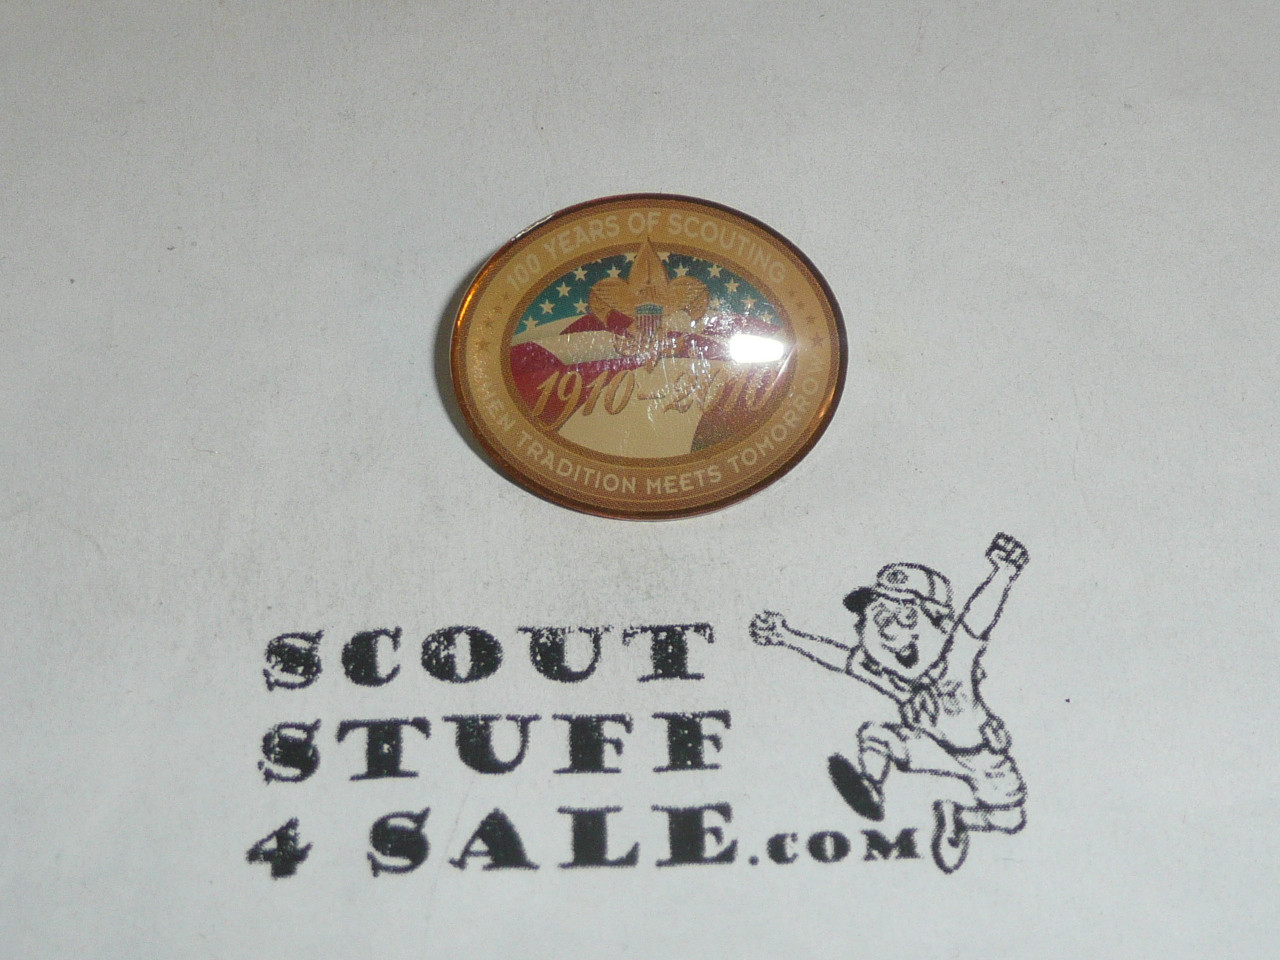 Boy Scout BSA 100th Years of Scouting When Tradition Meets Tomorrow Pin